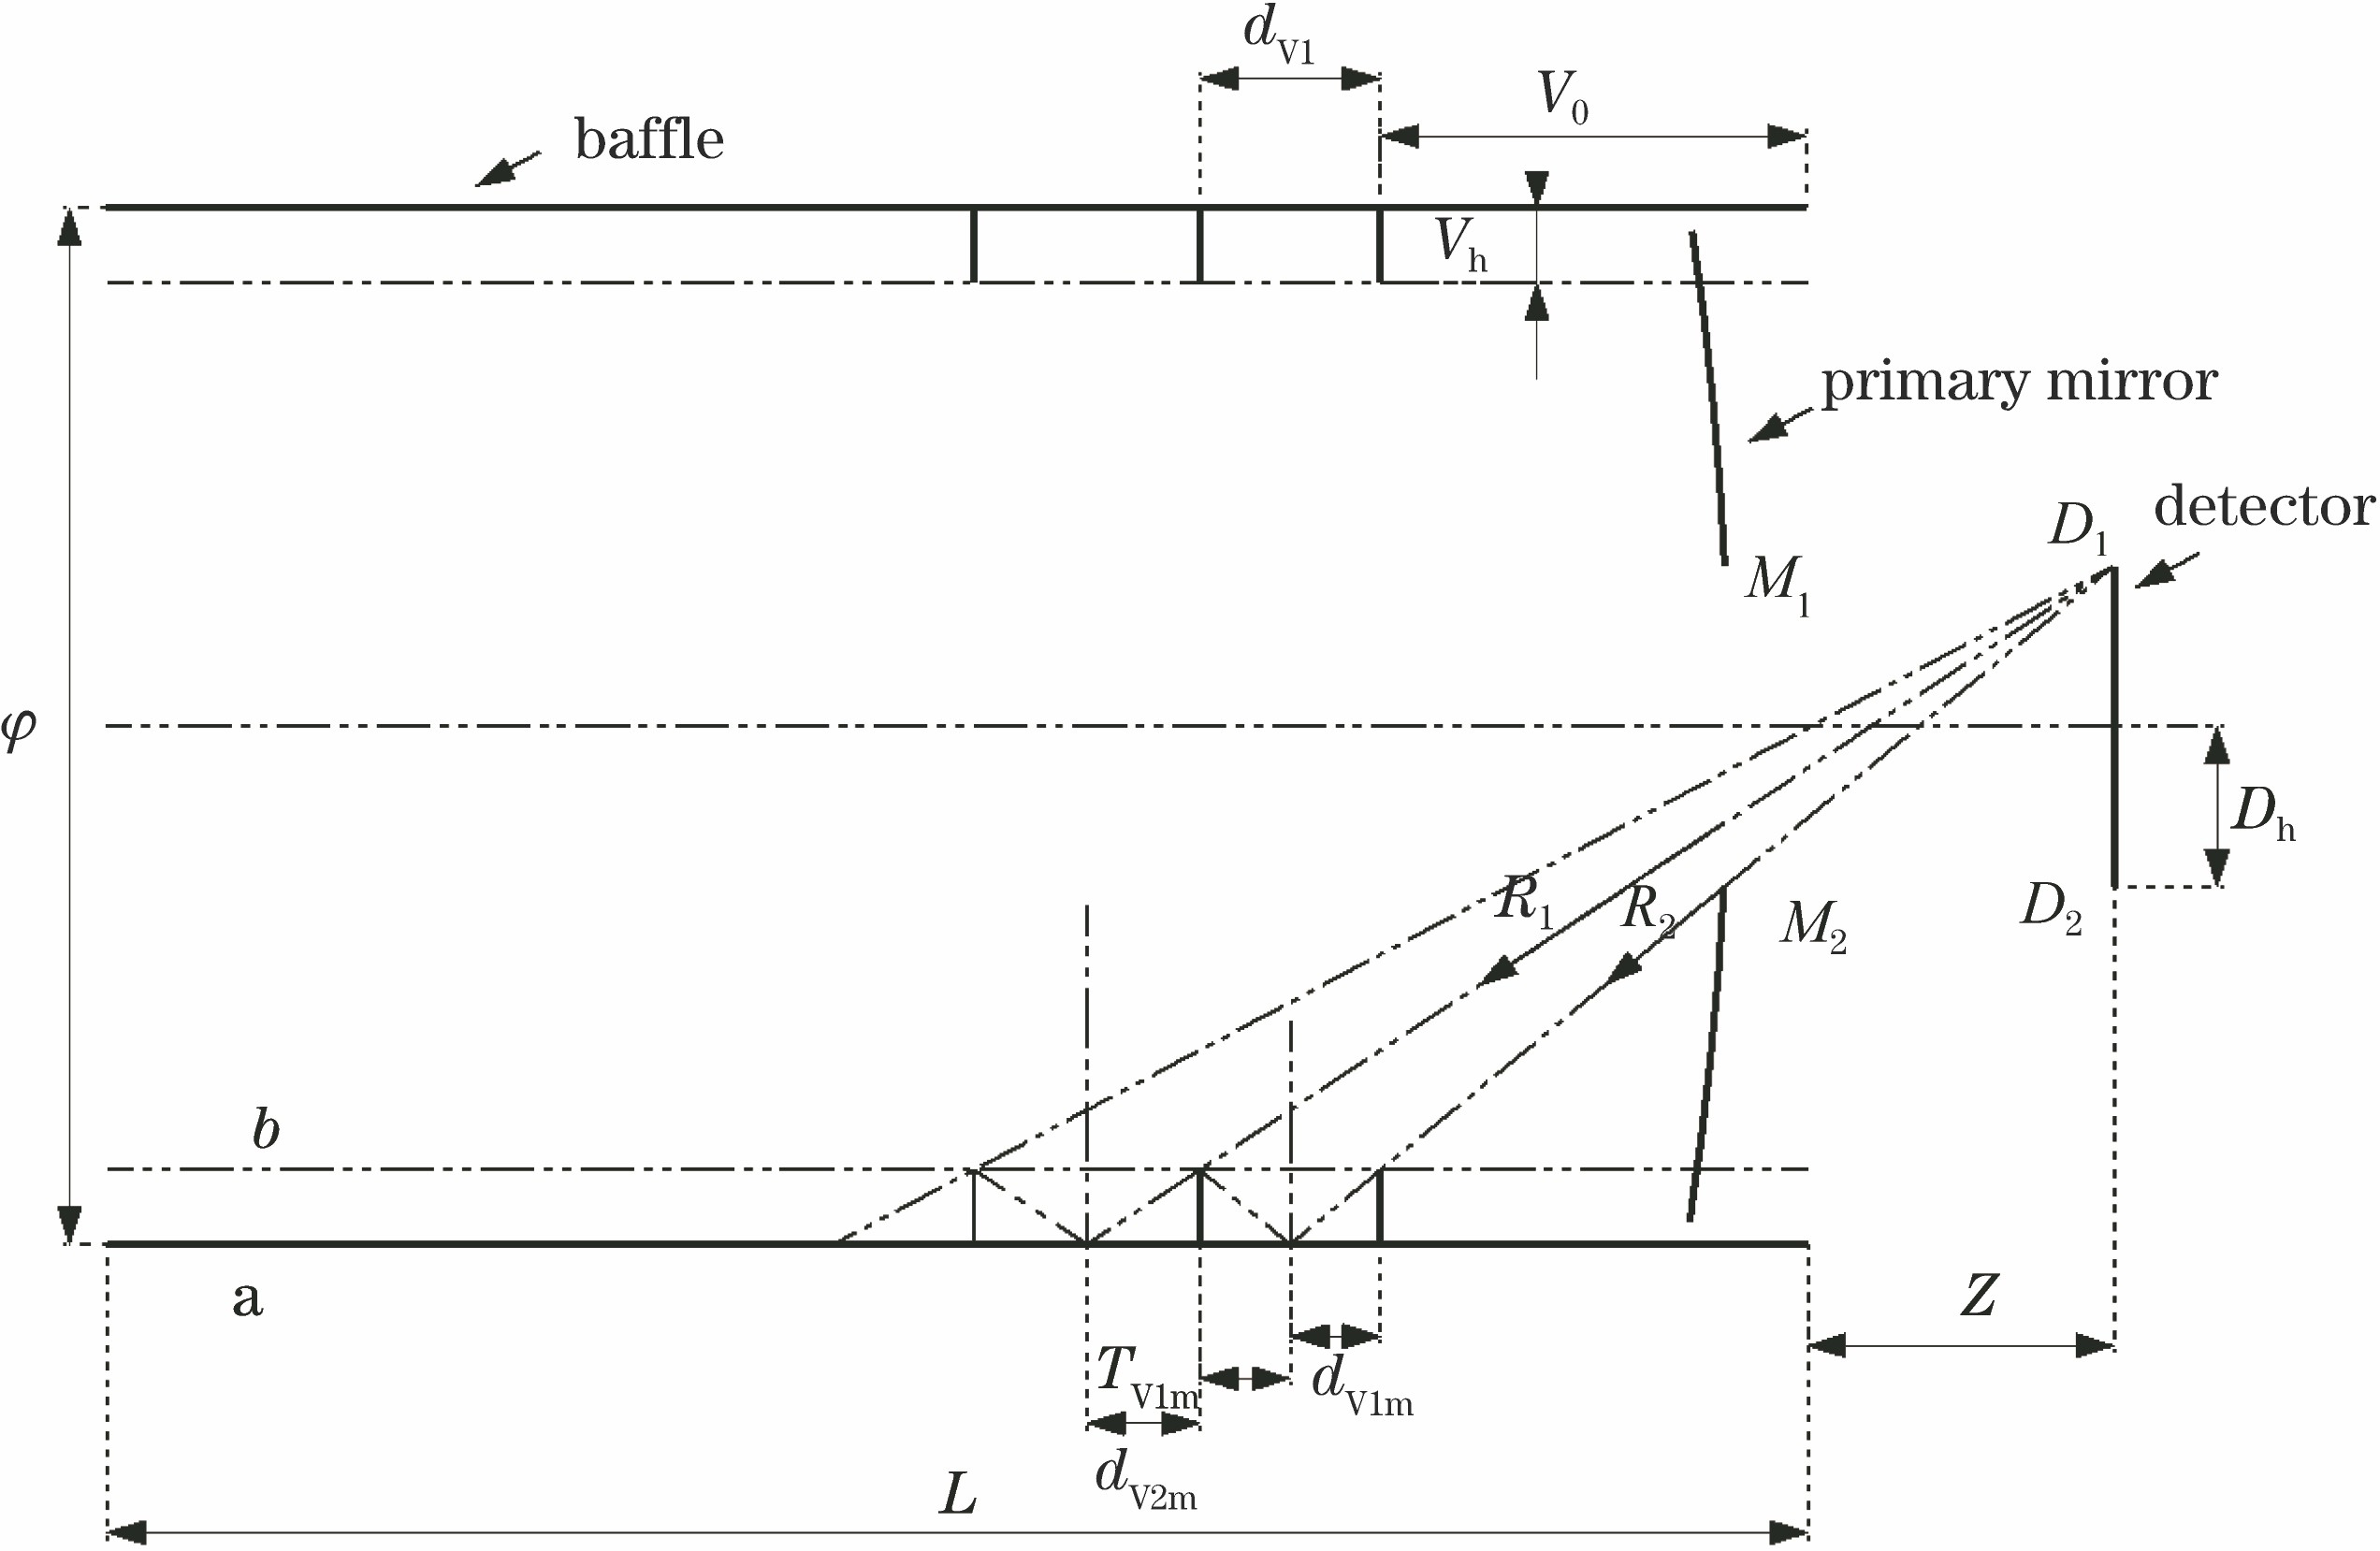 Parameters pertinent to design of vanes of the primary mirror baffle